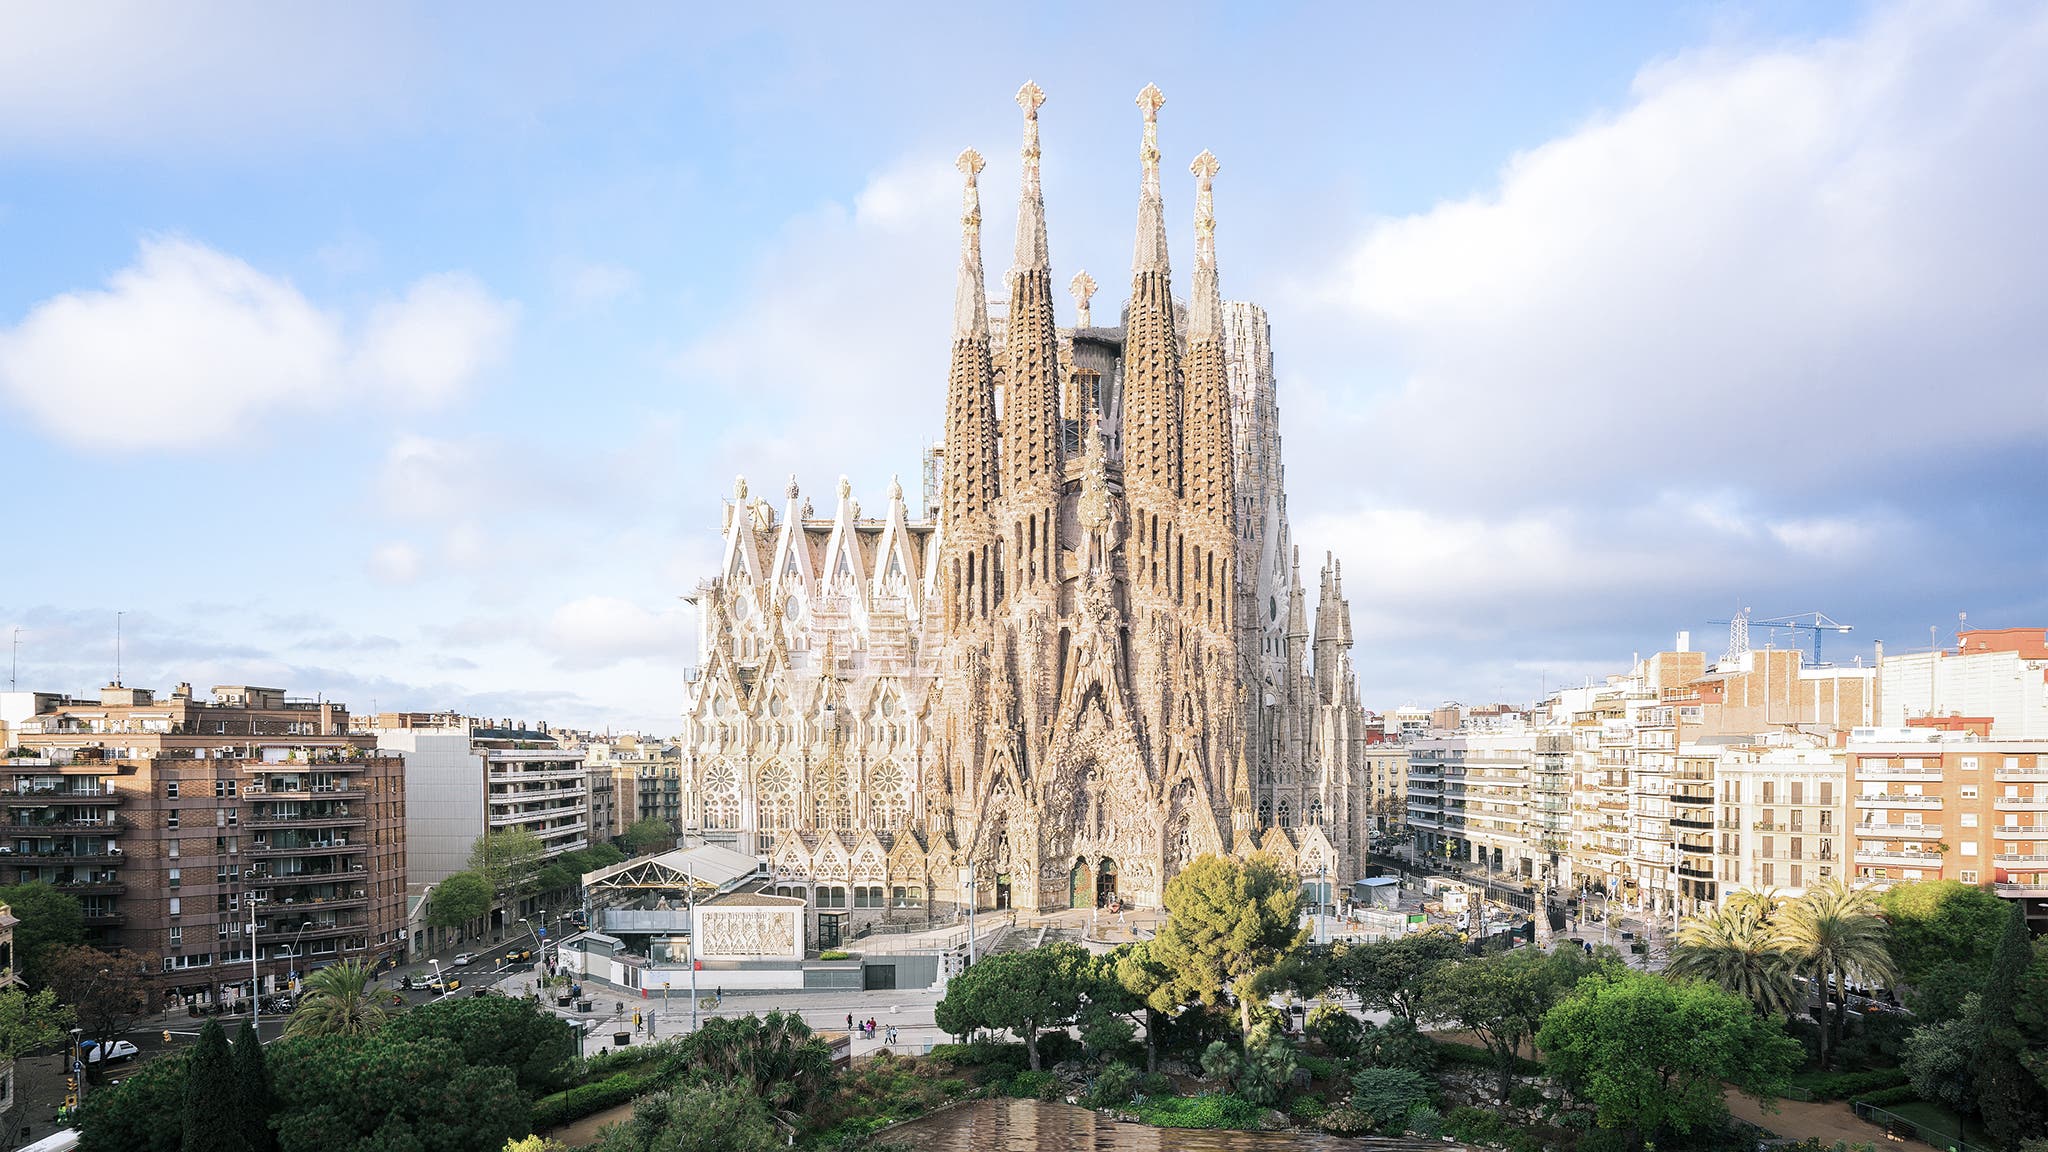 BARCELONA, SPAIN - April 9: Sagrada Familia on April 9, 2018 in Barcelona, Spain. This impressive cathedral was originally designed by Antoni Gaudi is still being built since 1882.